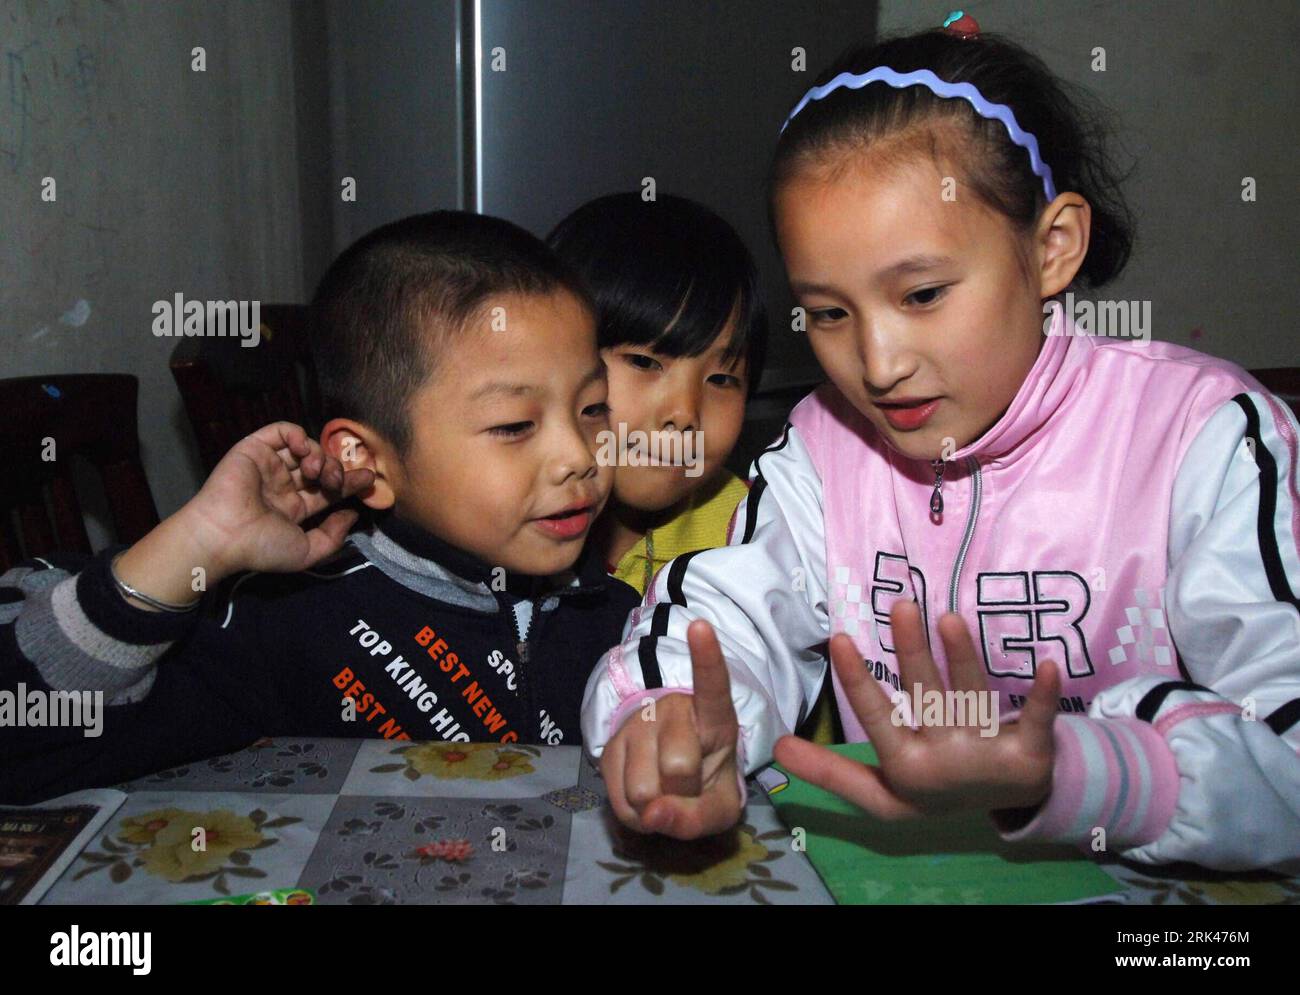 Bildnummer: 53596187  Datum: 31.10.2009  Copyright: imago/Xinhua (091113) -- HEFEI, Nov. 13, 2009 (Xinhua) -- Zhang Ling (R) tutors children of the neighborhood in Hefei, capital of east China s Anhui Province, Oct. 31, 2009. Wang Fang Primary School is located in a corner of Hefei City. As a private school especially for children of migrant workers, it has only ten rented rooms as classrooms, and a small clearing as the playground.  has grown up.  (Xinhua/Li Jian)(zgp) PUBLICATIONxNOTxINxCHN Kinder Land Leute Fotostory kbdig xsk 2009 quer o0 Hausaufgaben, Bruder, helfen    Bildnummer 53596187 Stock Photo